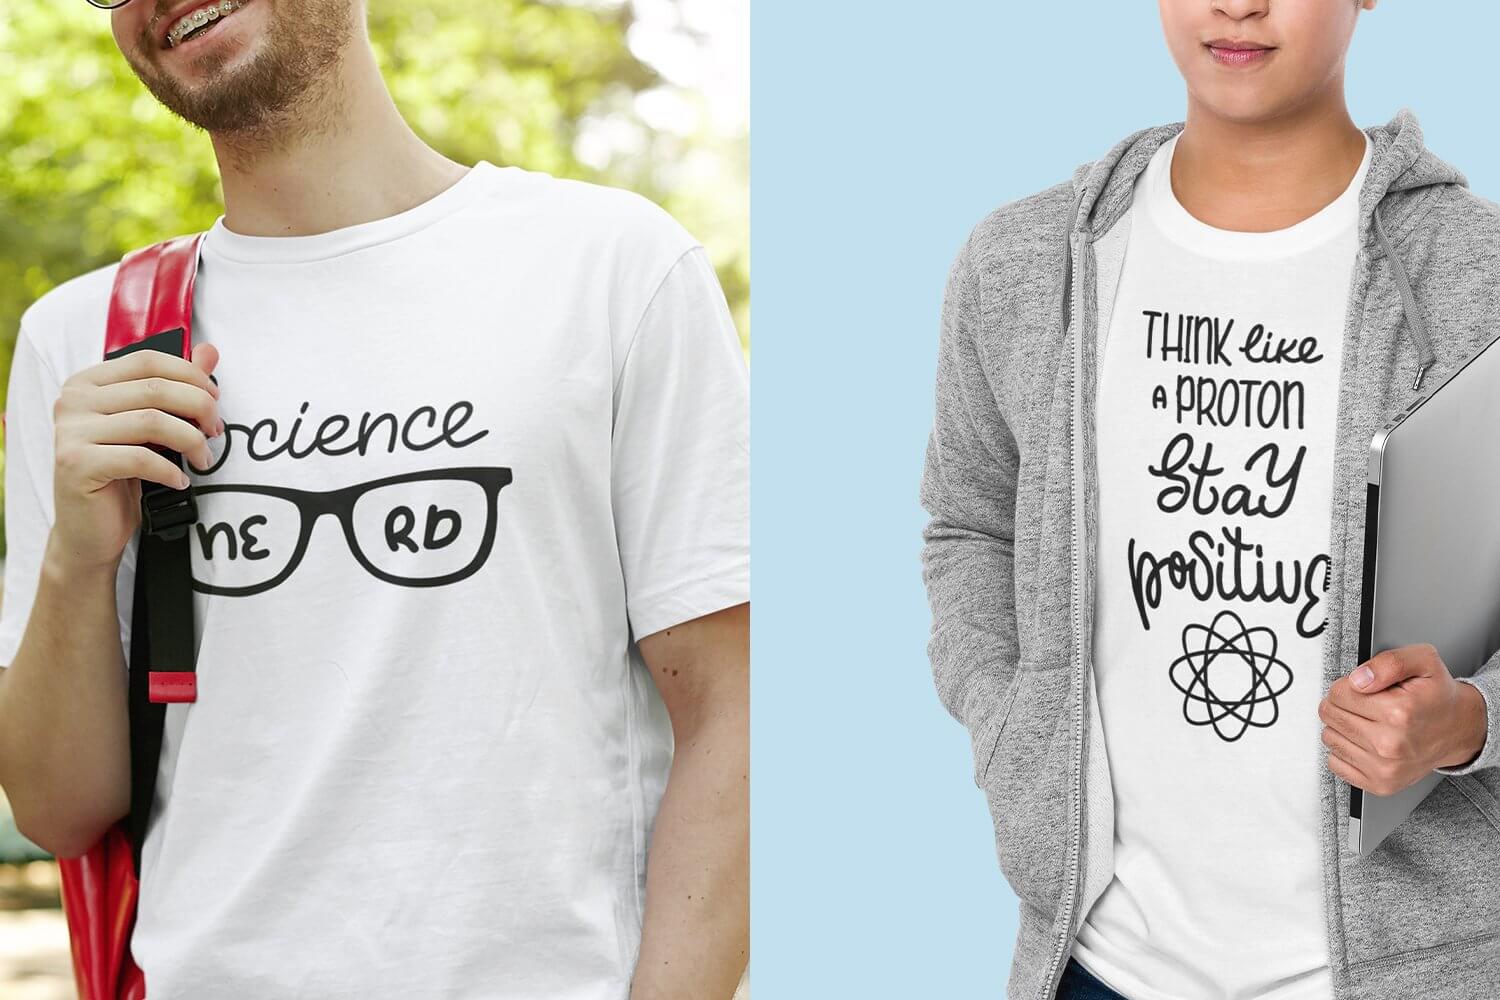 Science logos painted on a white t-shirts.